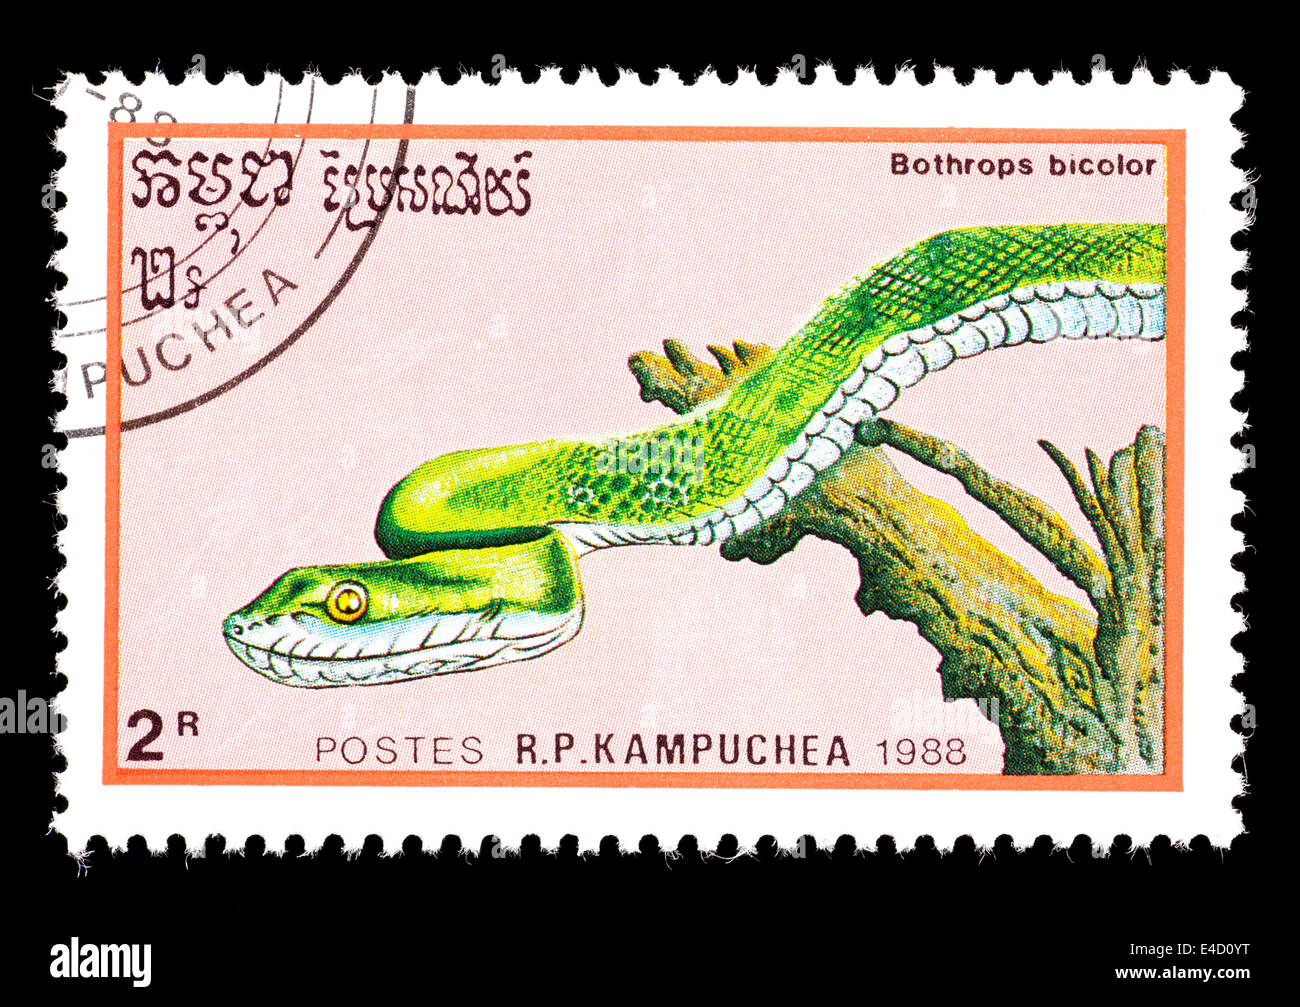 Postage stamp from Cambodia (Kampuchea) depicting a Guatemala Palm Pit Viper (Bothrops bicolor) Stock Photo